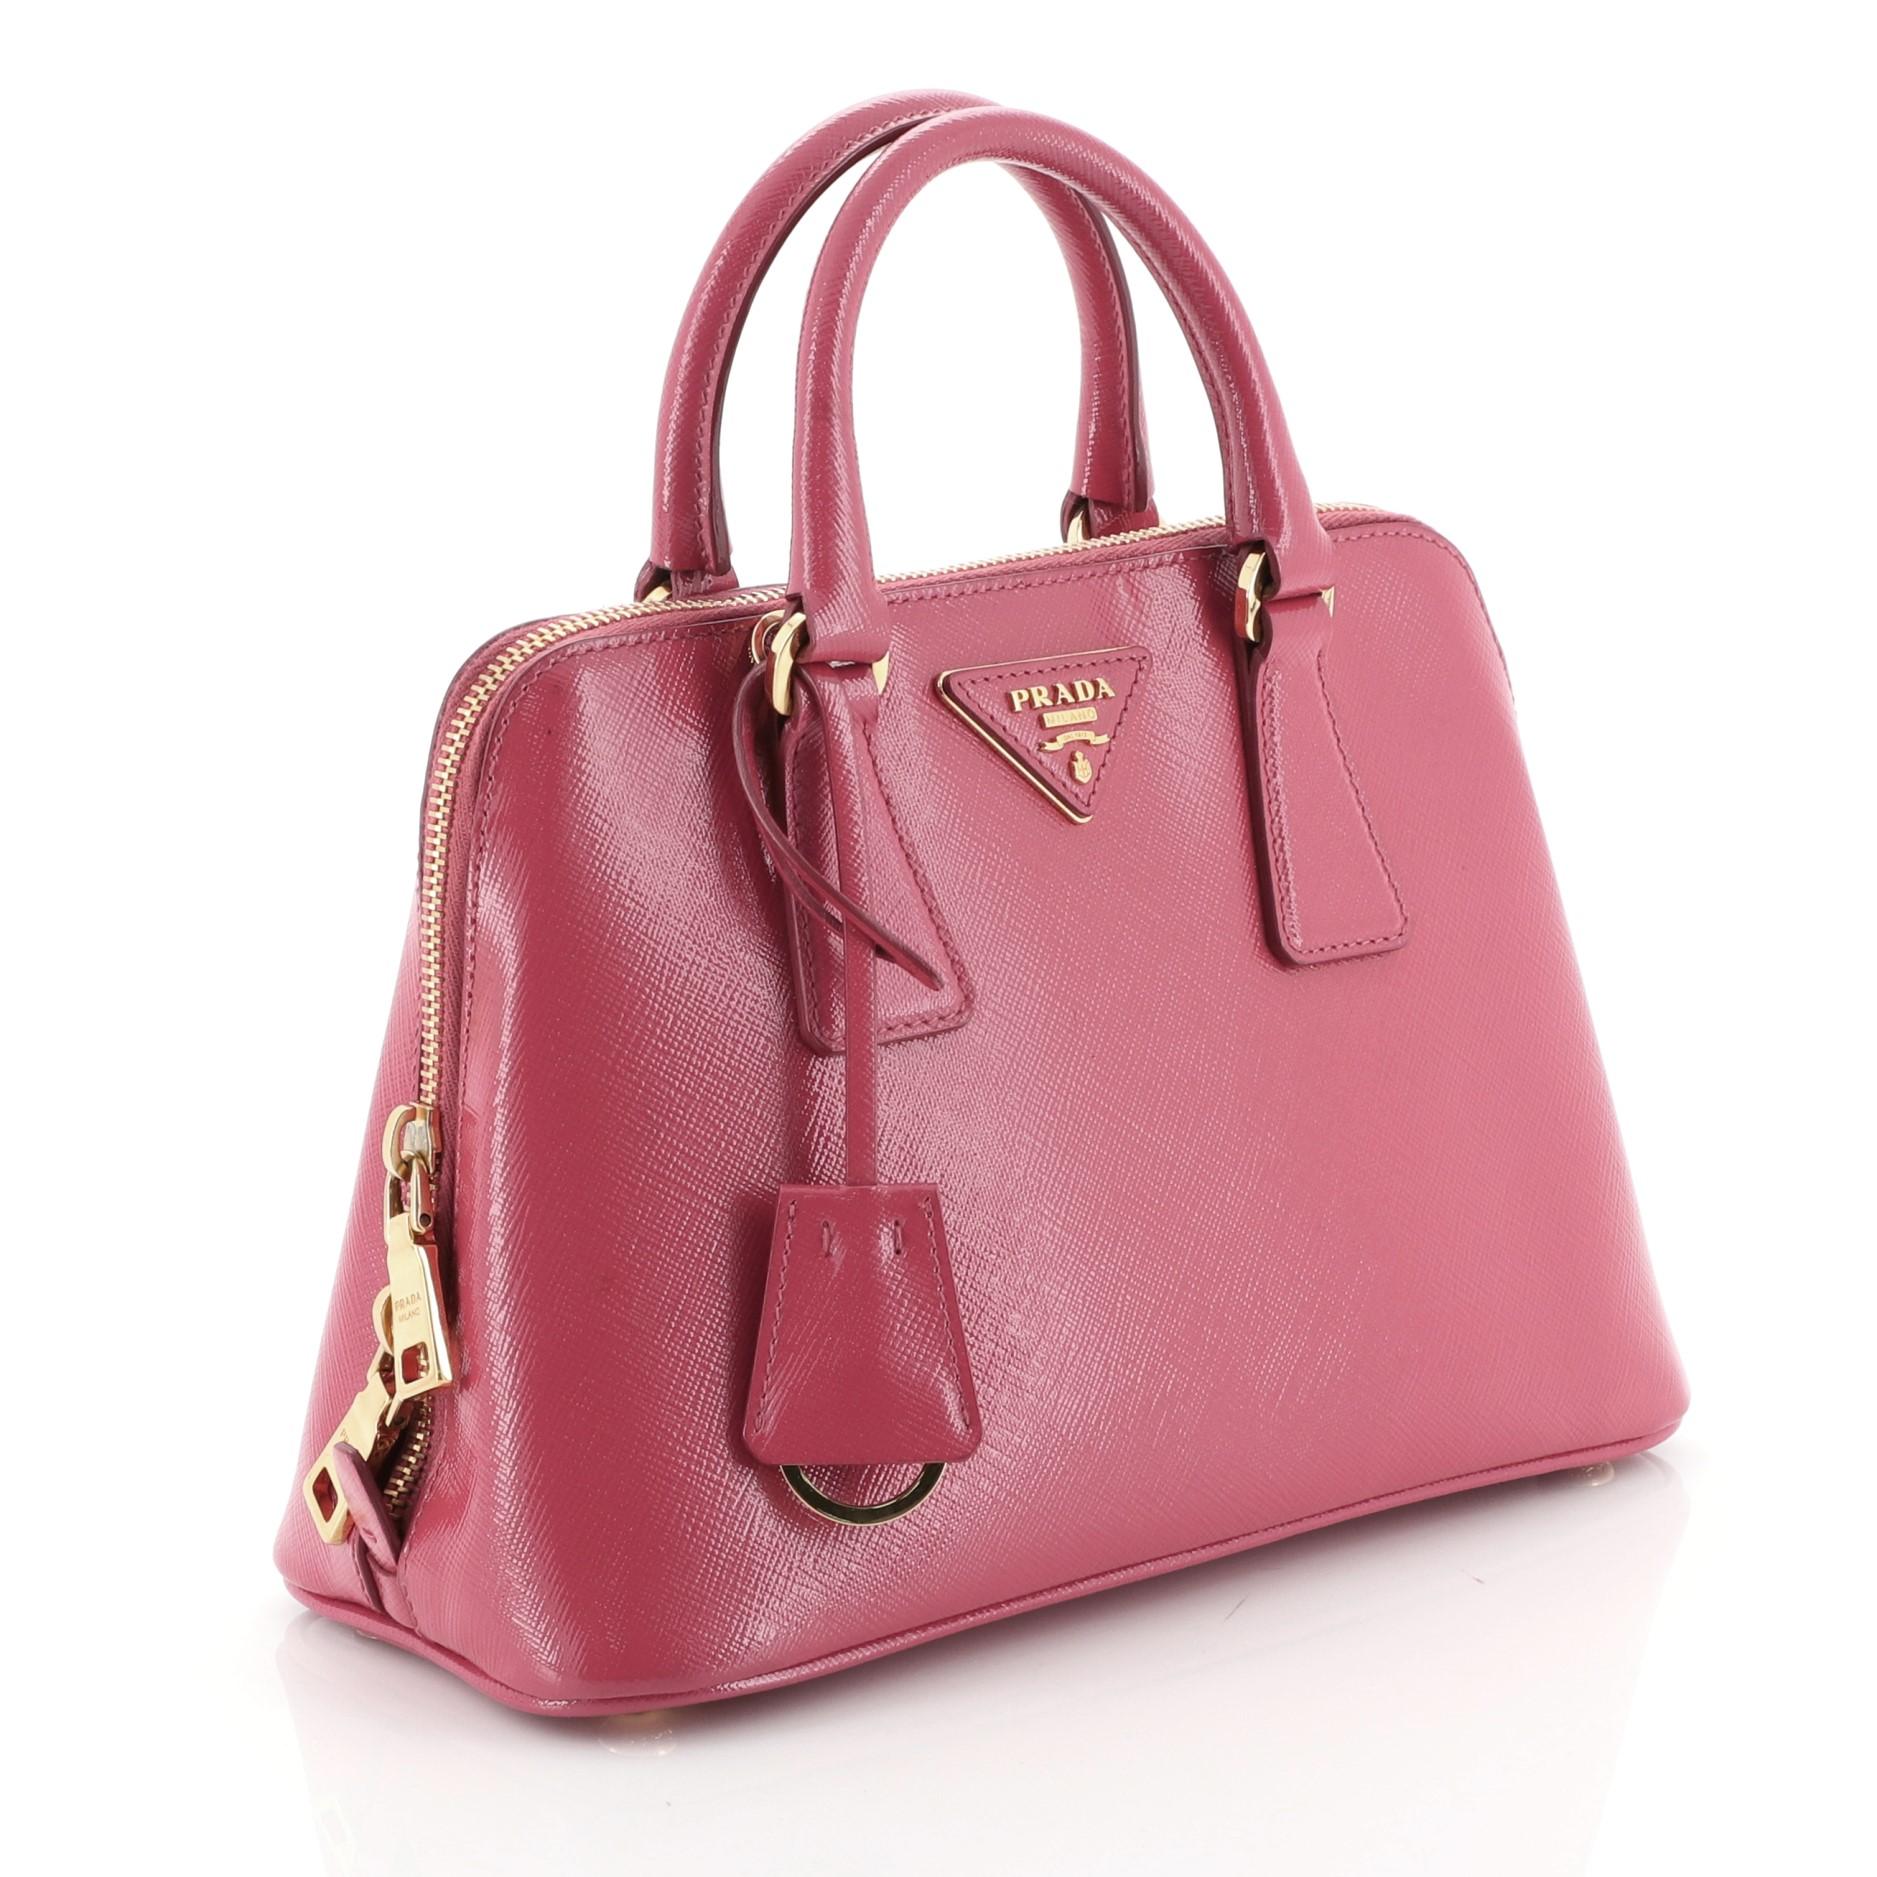 This Prada Promenade Handbag Vernice Saffiano Leather Small, crafted from pink vernice saffiano leather, features dual rolled handles, triangle Prada logo, and gold-tone hardware. Its two-way zip closure opens to a pink fabric interior with a center